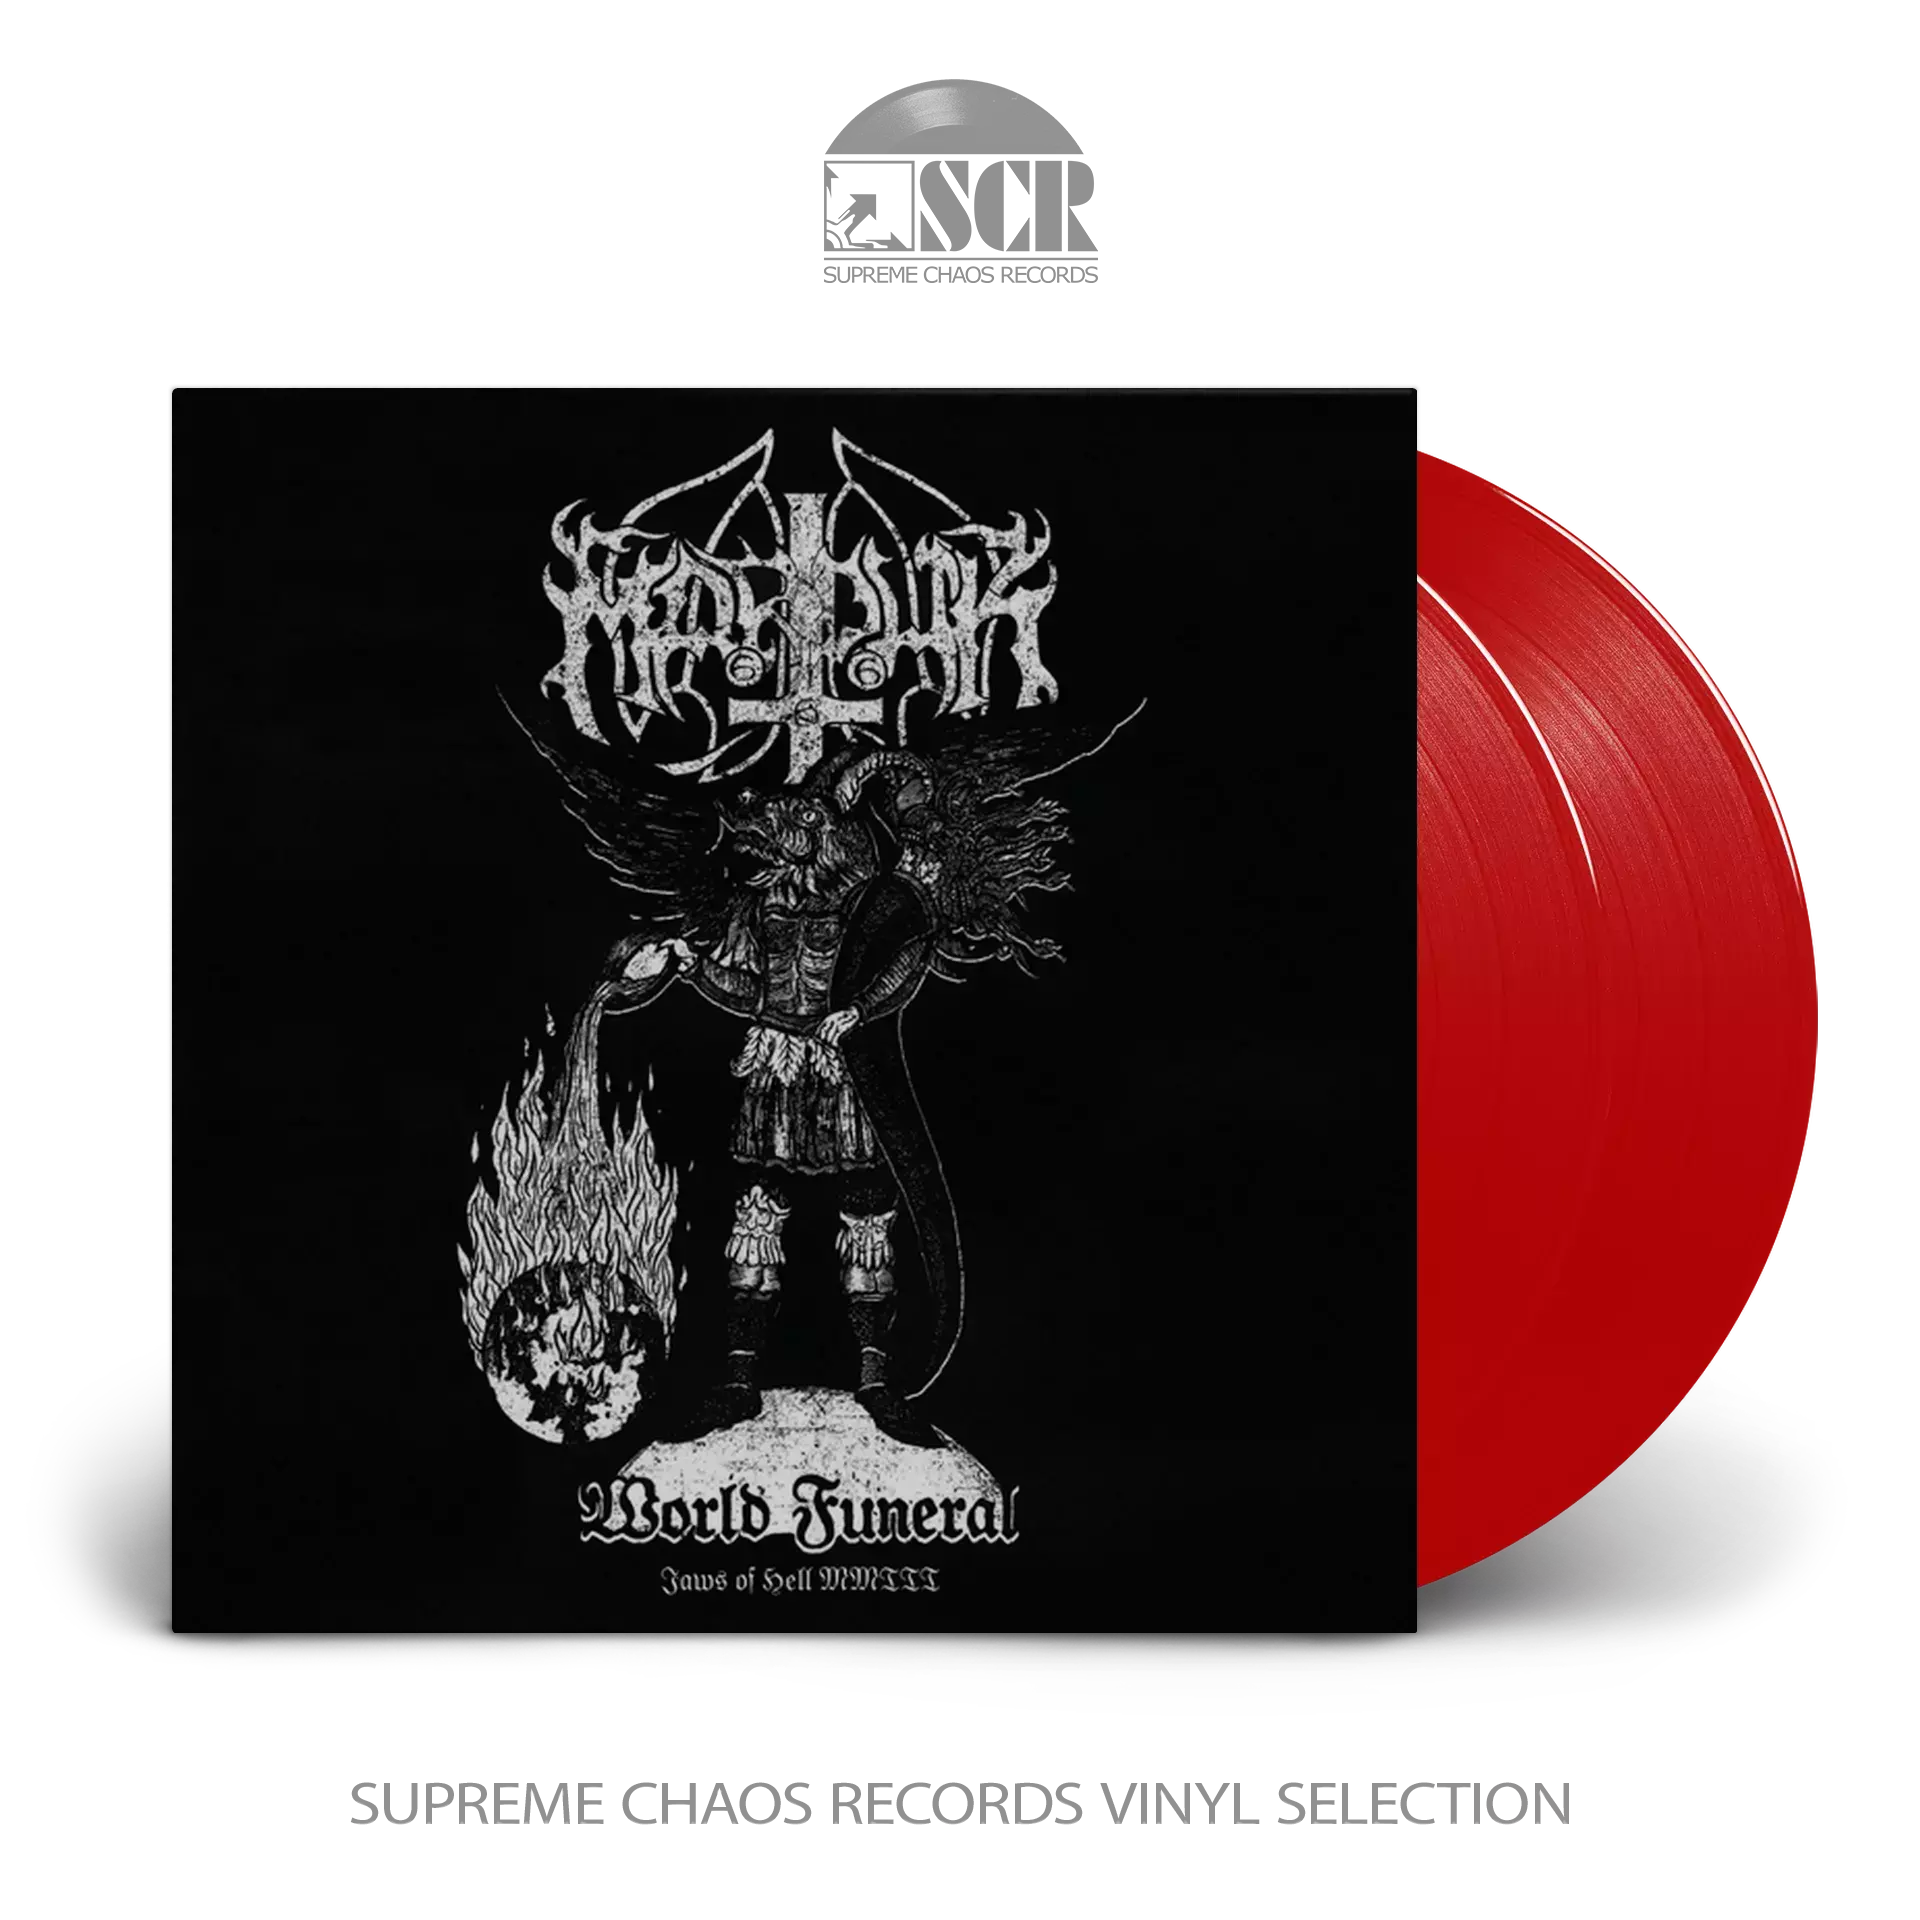 MARDUK - World Funeral – Jaws Of Hell – MMIII [RED DLP]